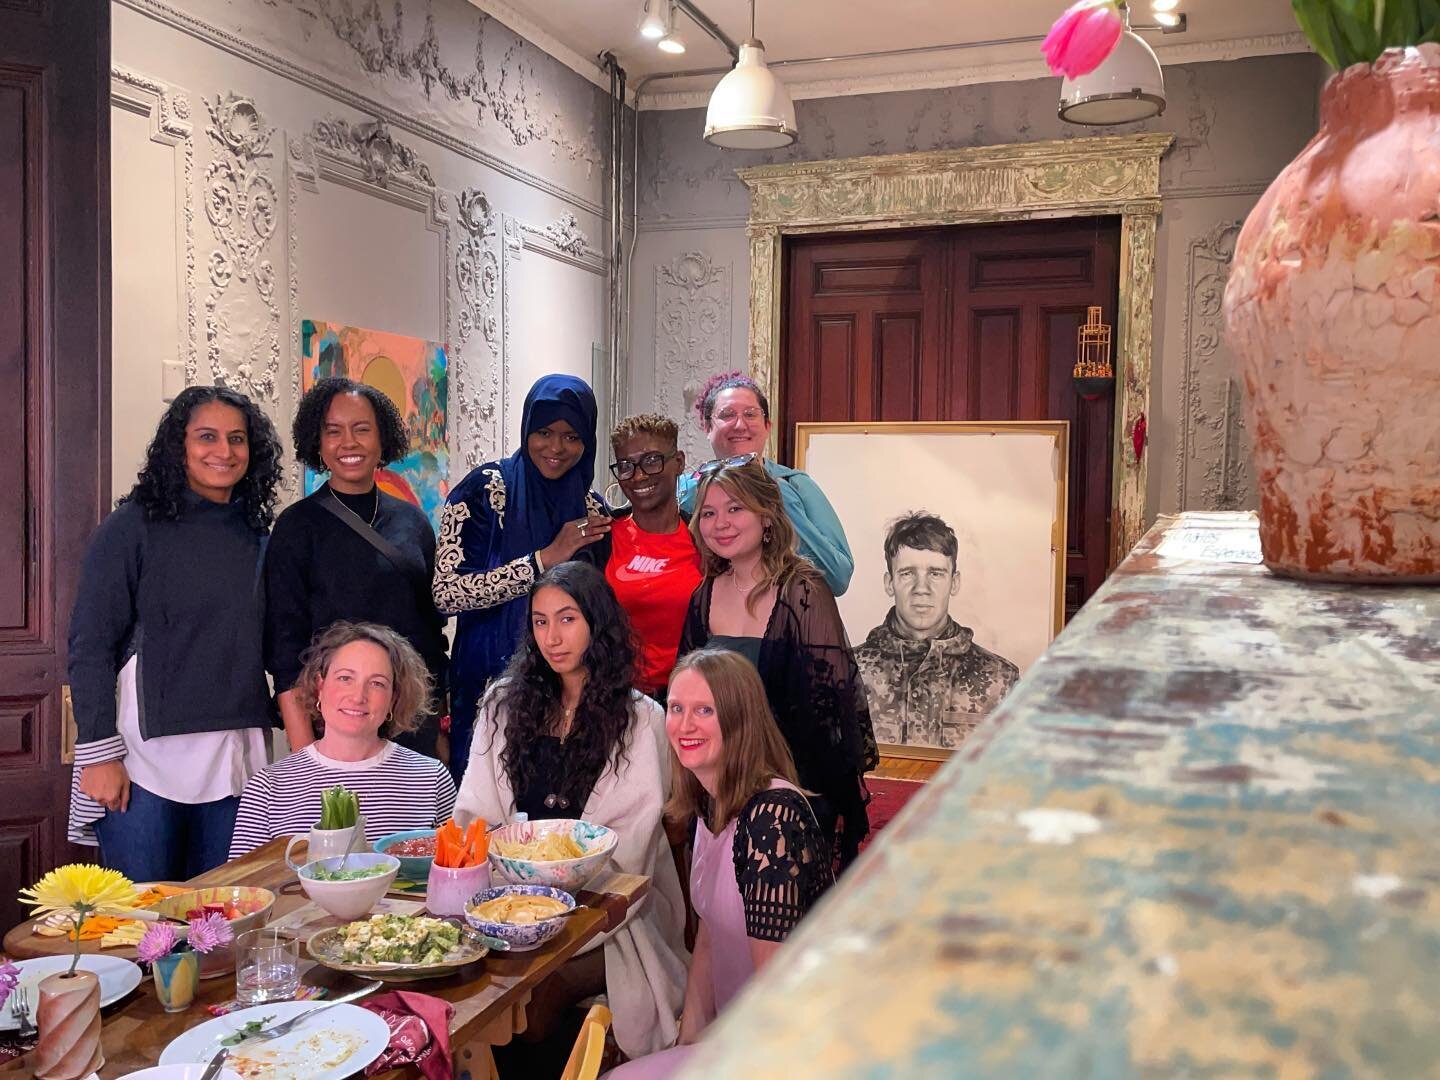 On Friday, our D/A team joined the @concourse_house Arts Program mothers, staff, and community partners yesterday for a Valentines Day lunch to show our love and appreciation for one another. A joyful afternoon of sharing updates, reflecting on our e